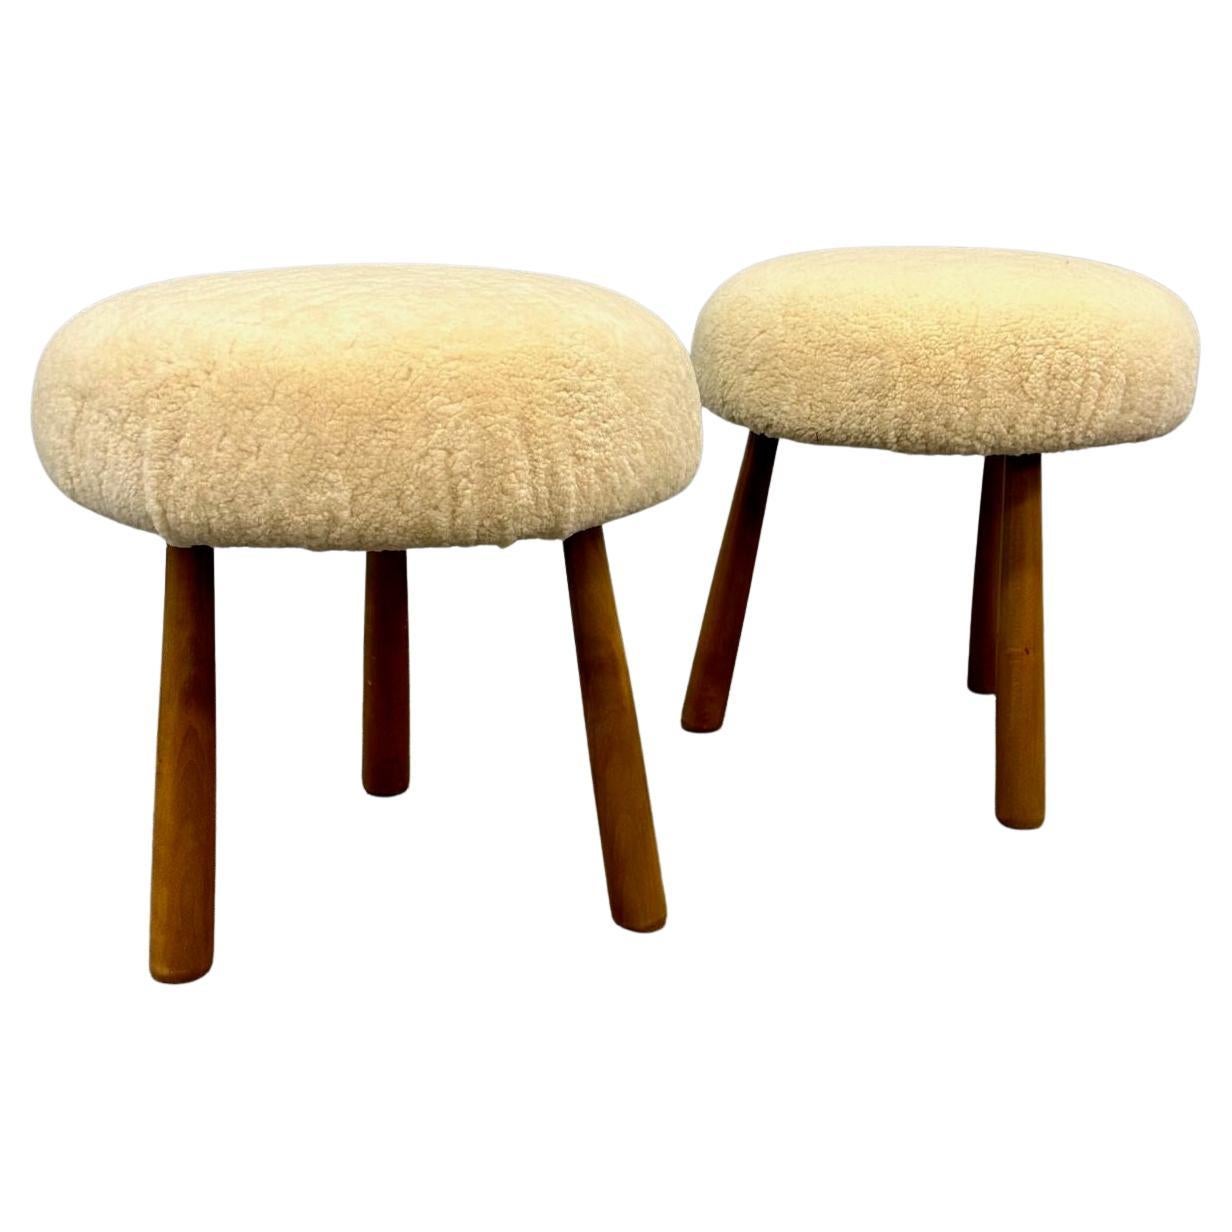 Pair Contemporary Swedish Modern Style Sheepskin Footstools / Ottomans, Beige For Sale